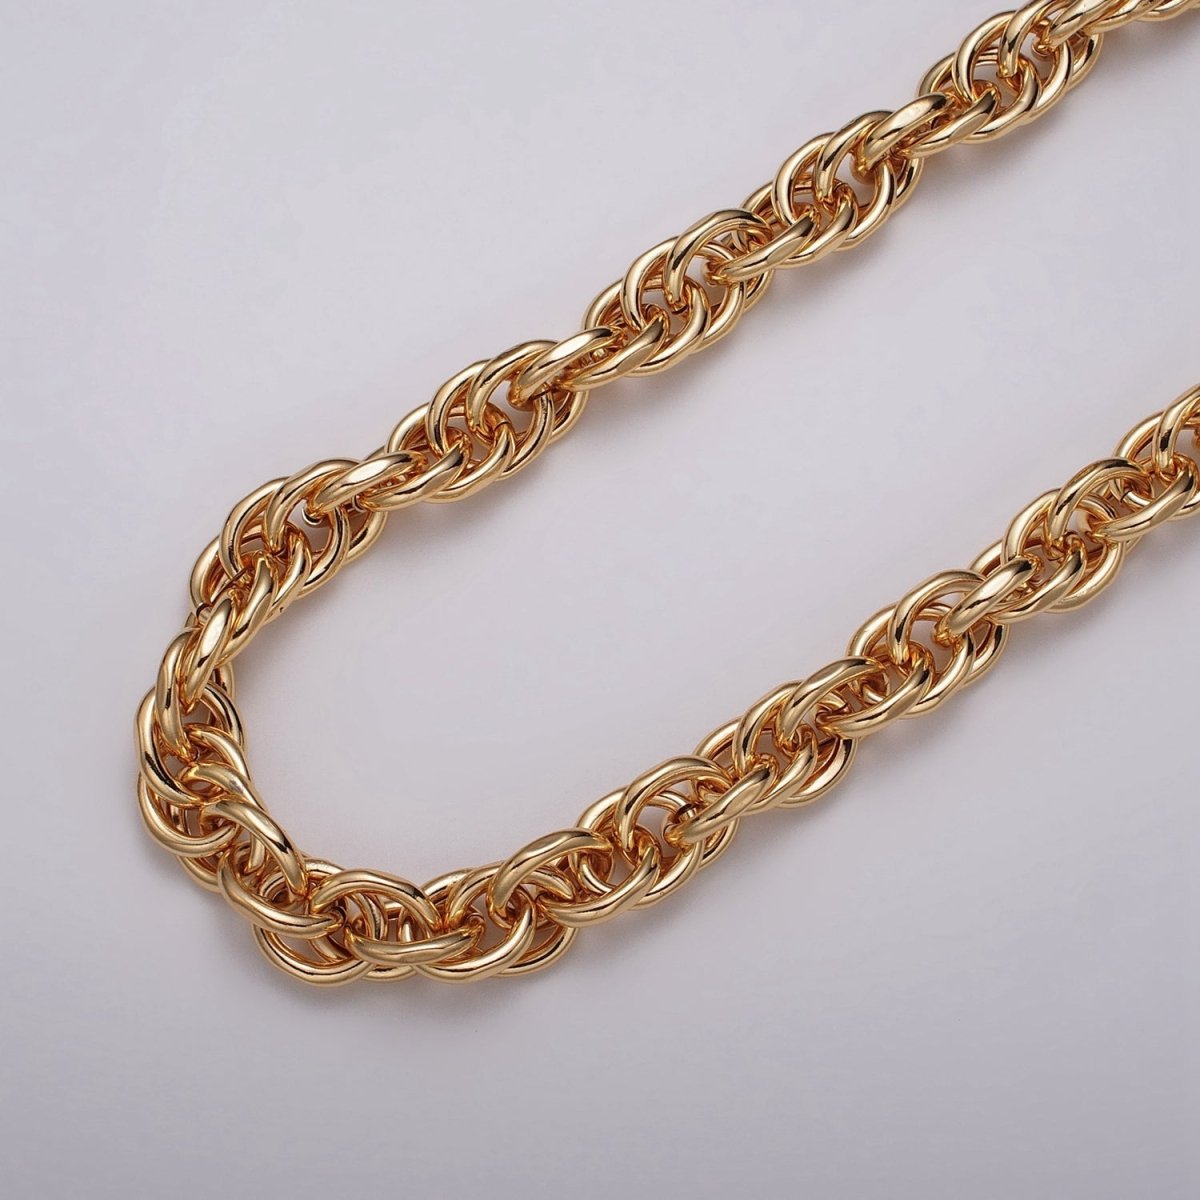 Unsoldered Gold Espiga Spiga Wheat Chain 13mm, 17.5mm Width for Statement Jewelry Unfinished Chain by Yard in Gold & Silver Unsoldered | ROLL-1183 ~ ROLL-1186 Clearance Pricing - DLUXCA